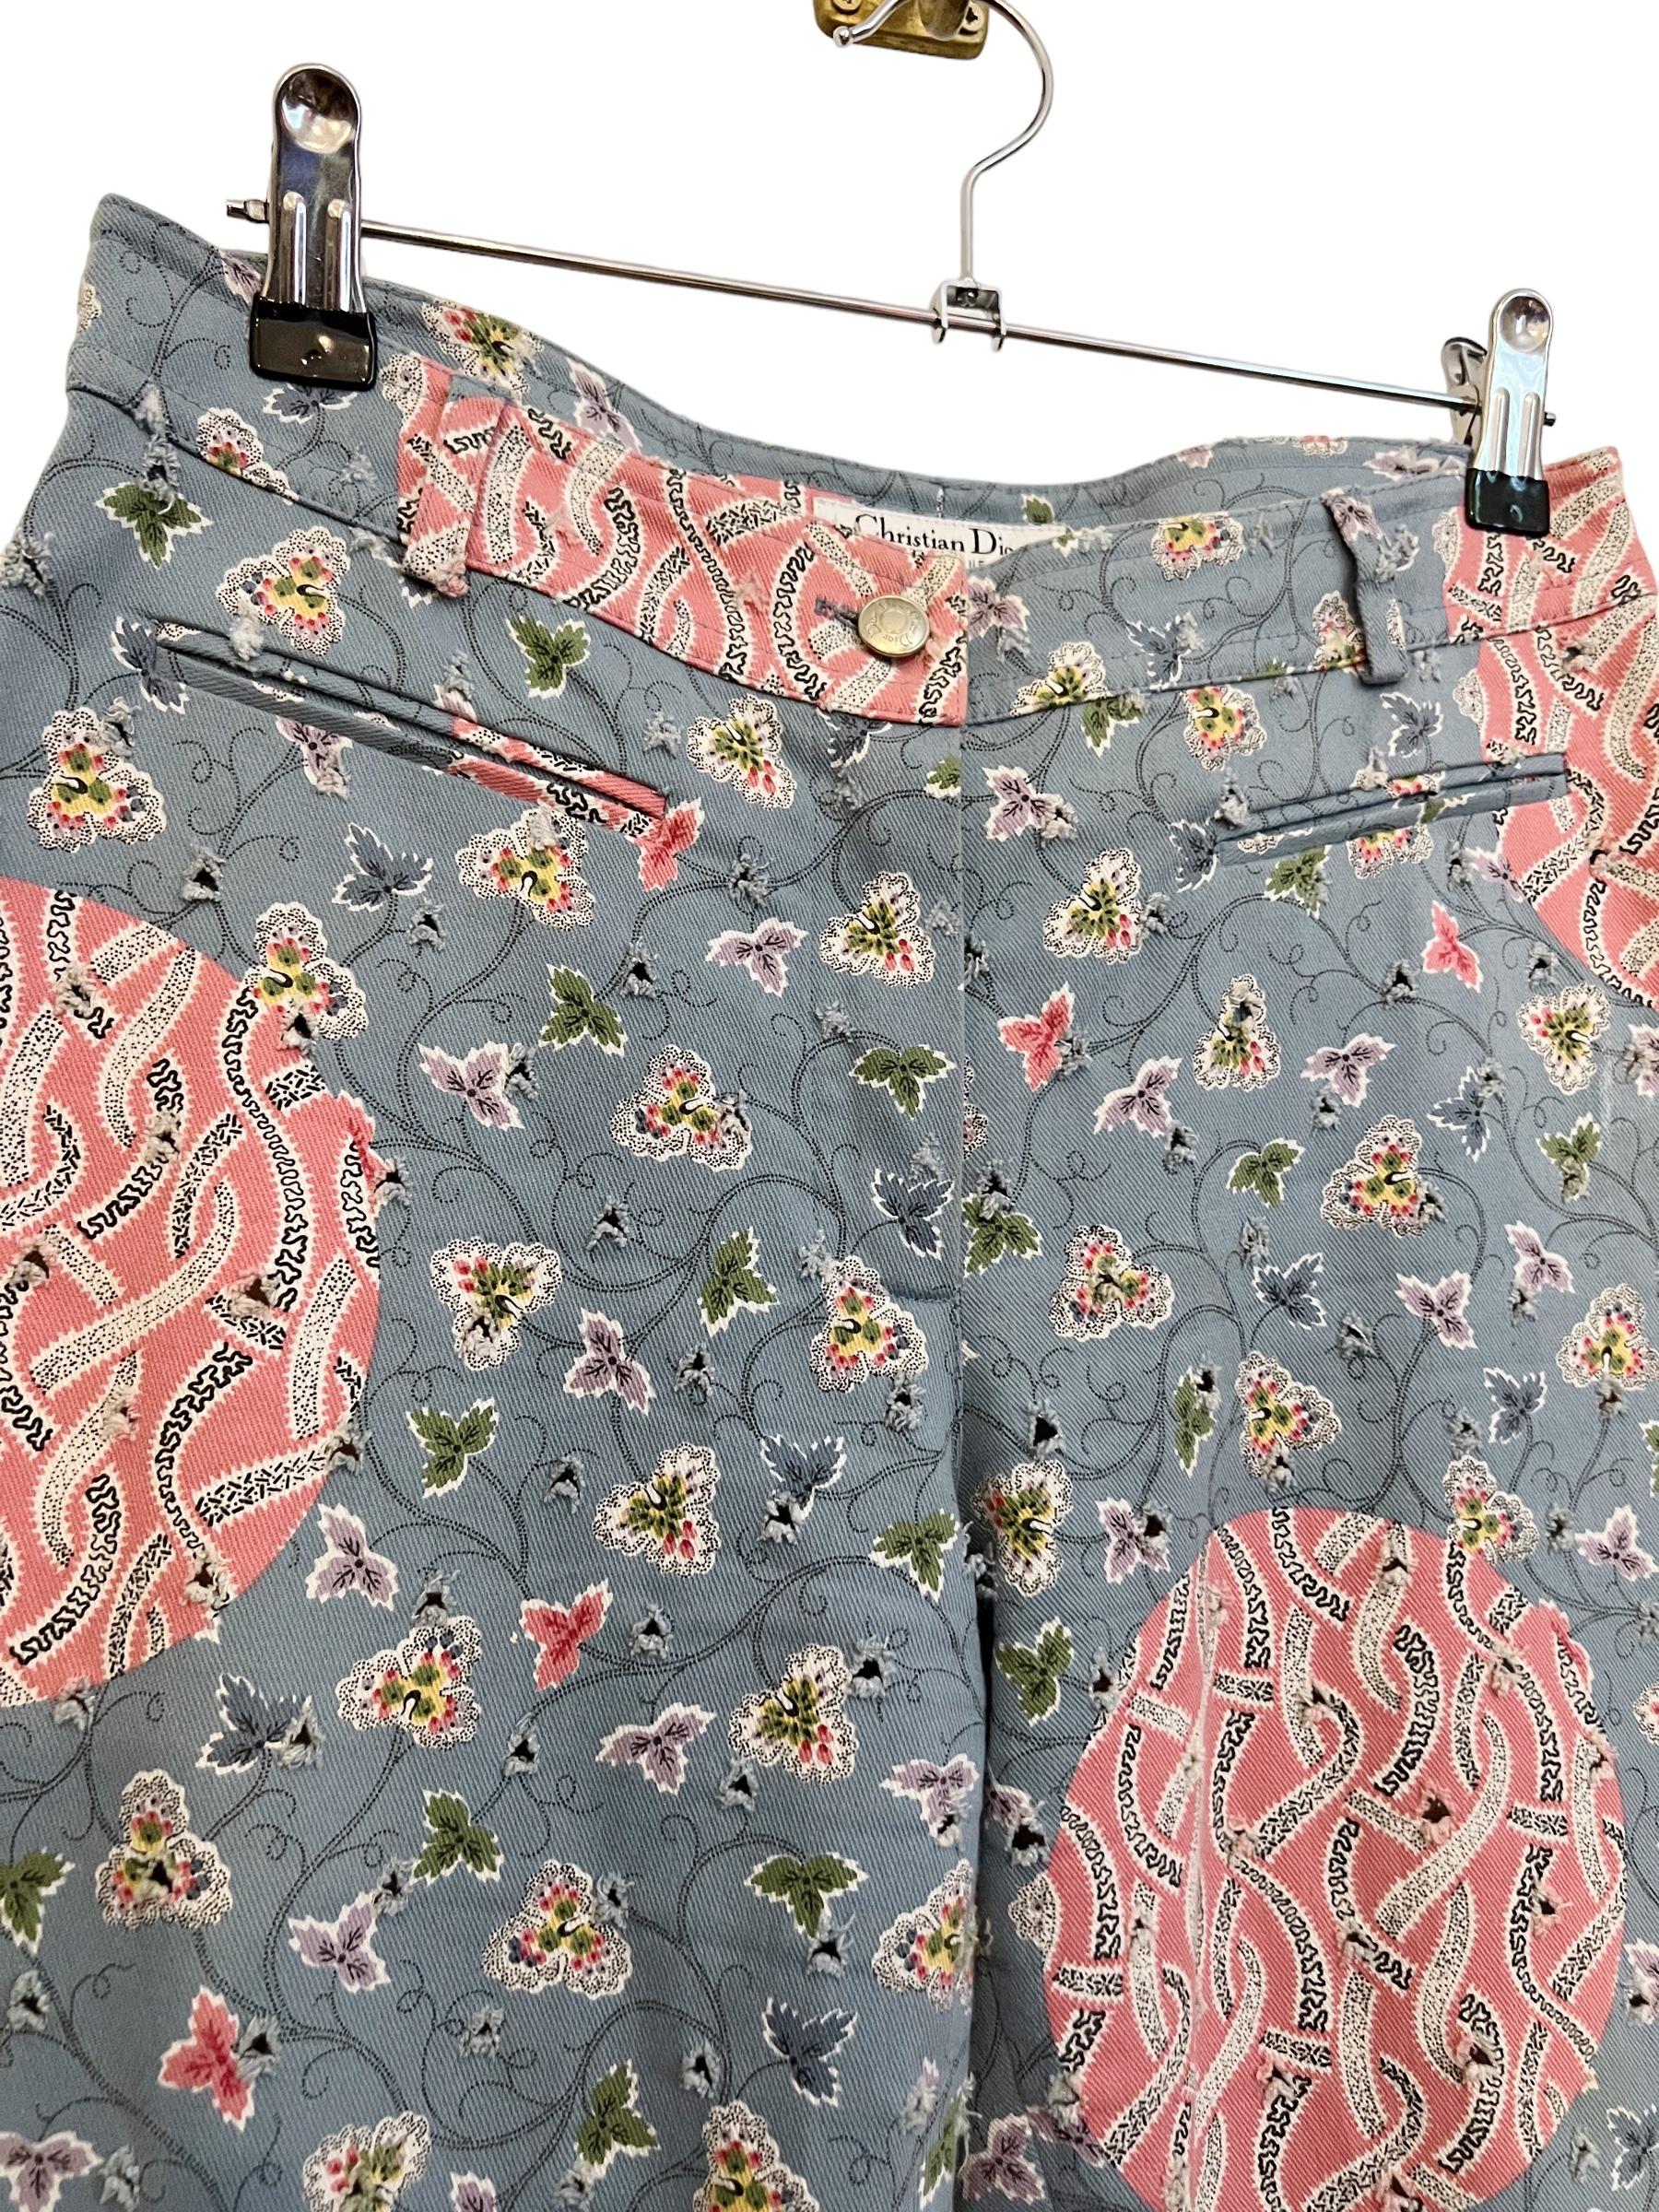 Vintage Y2k Low Rise Christian Dior by Galliano Floral Blossom pattern Jeans In Excellent Condition For Sale In Sheffield, GB